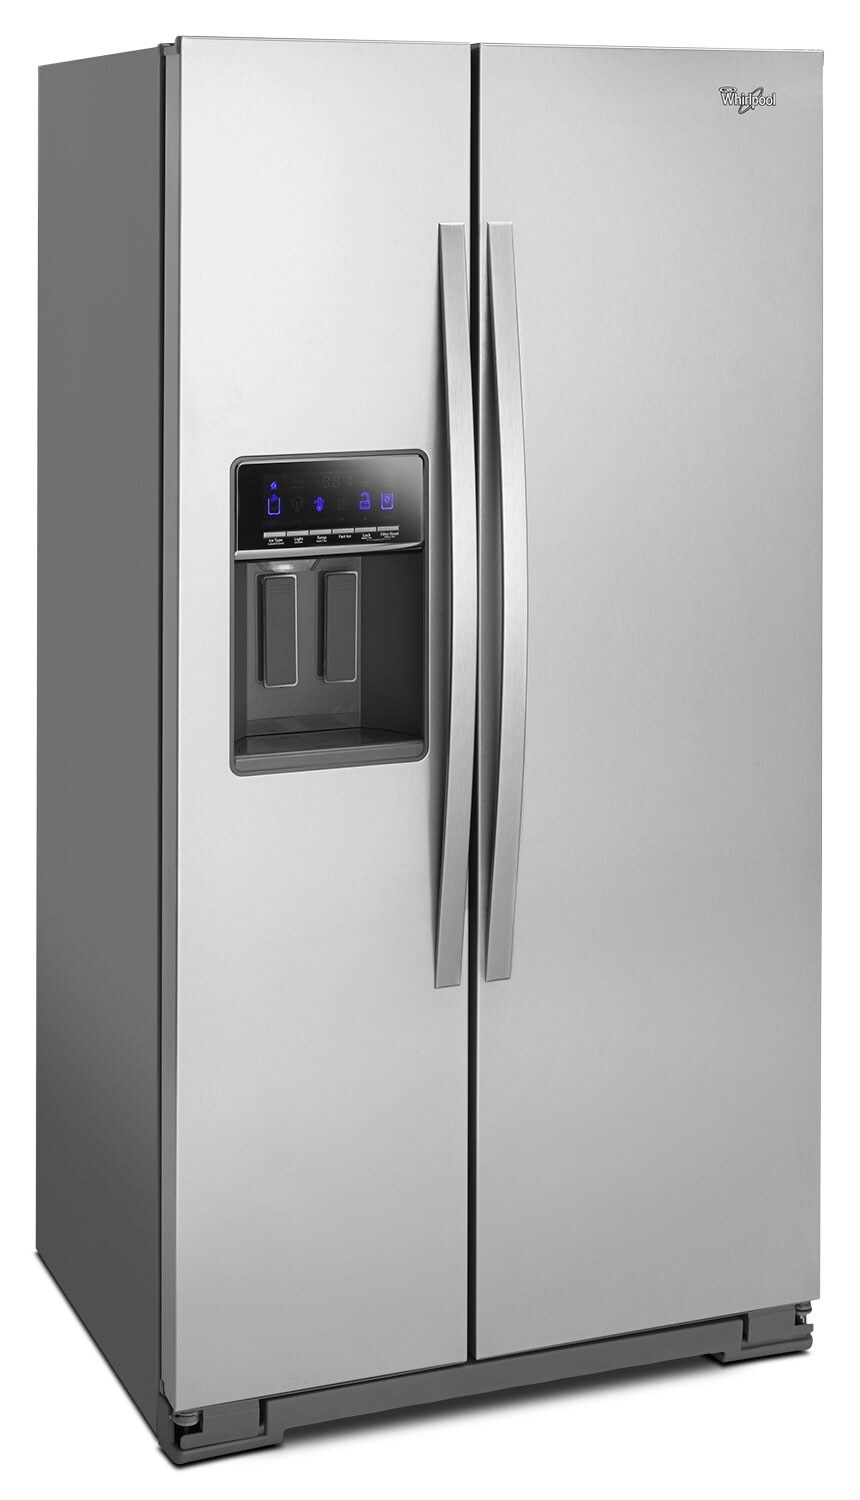 Whirlpool Stainless Steel Side-by-Side Refrigerator (20.5 Cu. Ft Whirlpool Side By Side Stainless Steel Refrigerator